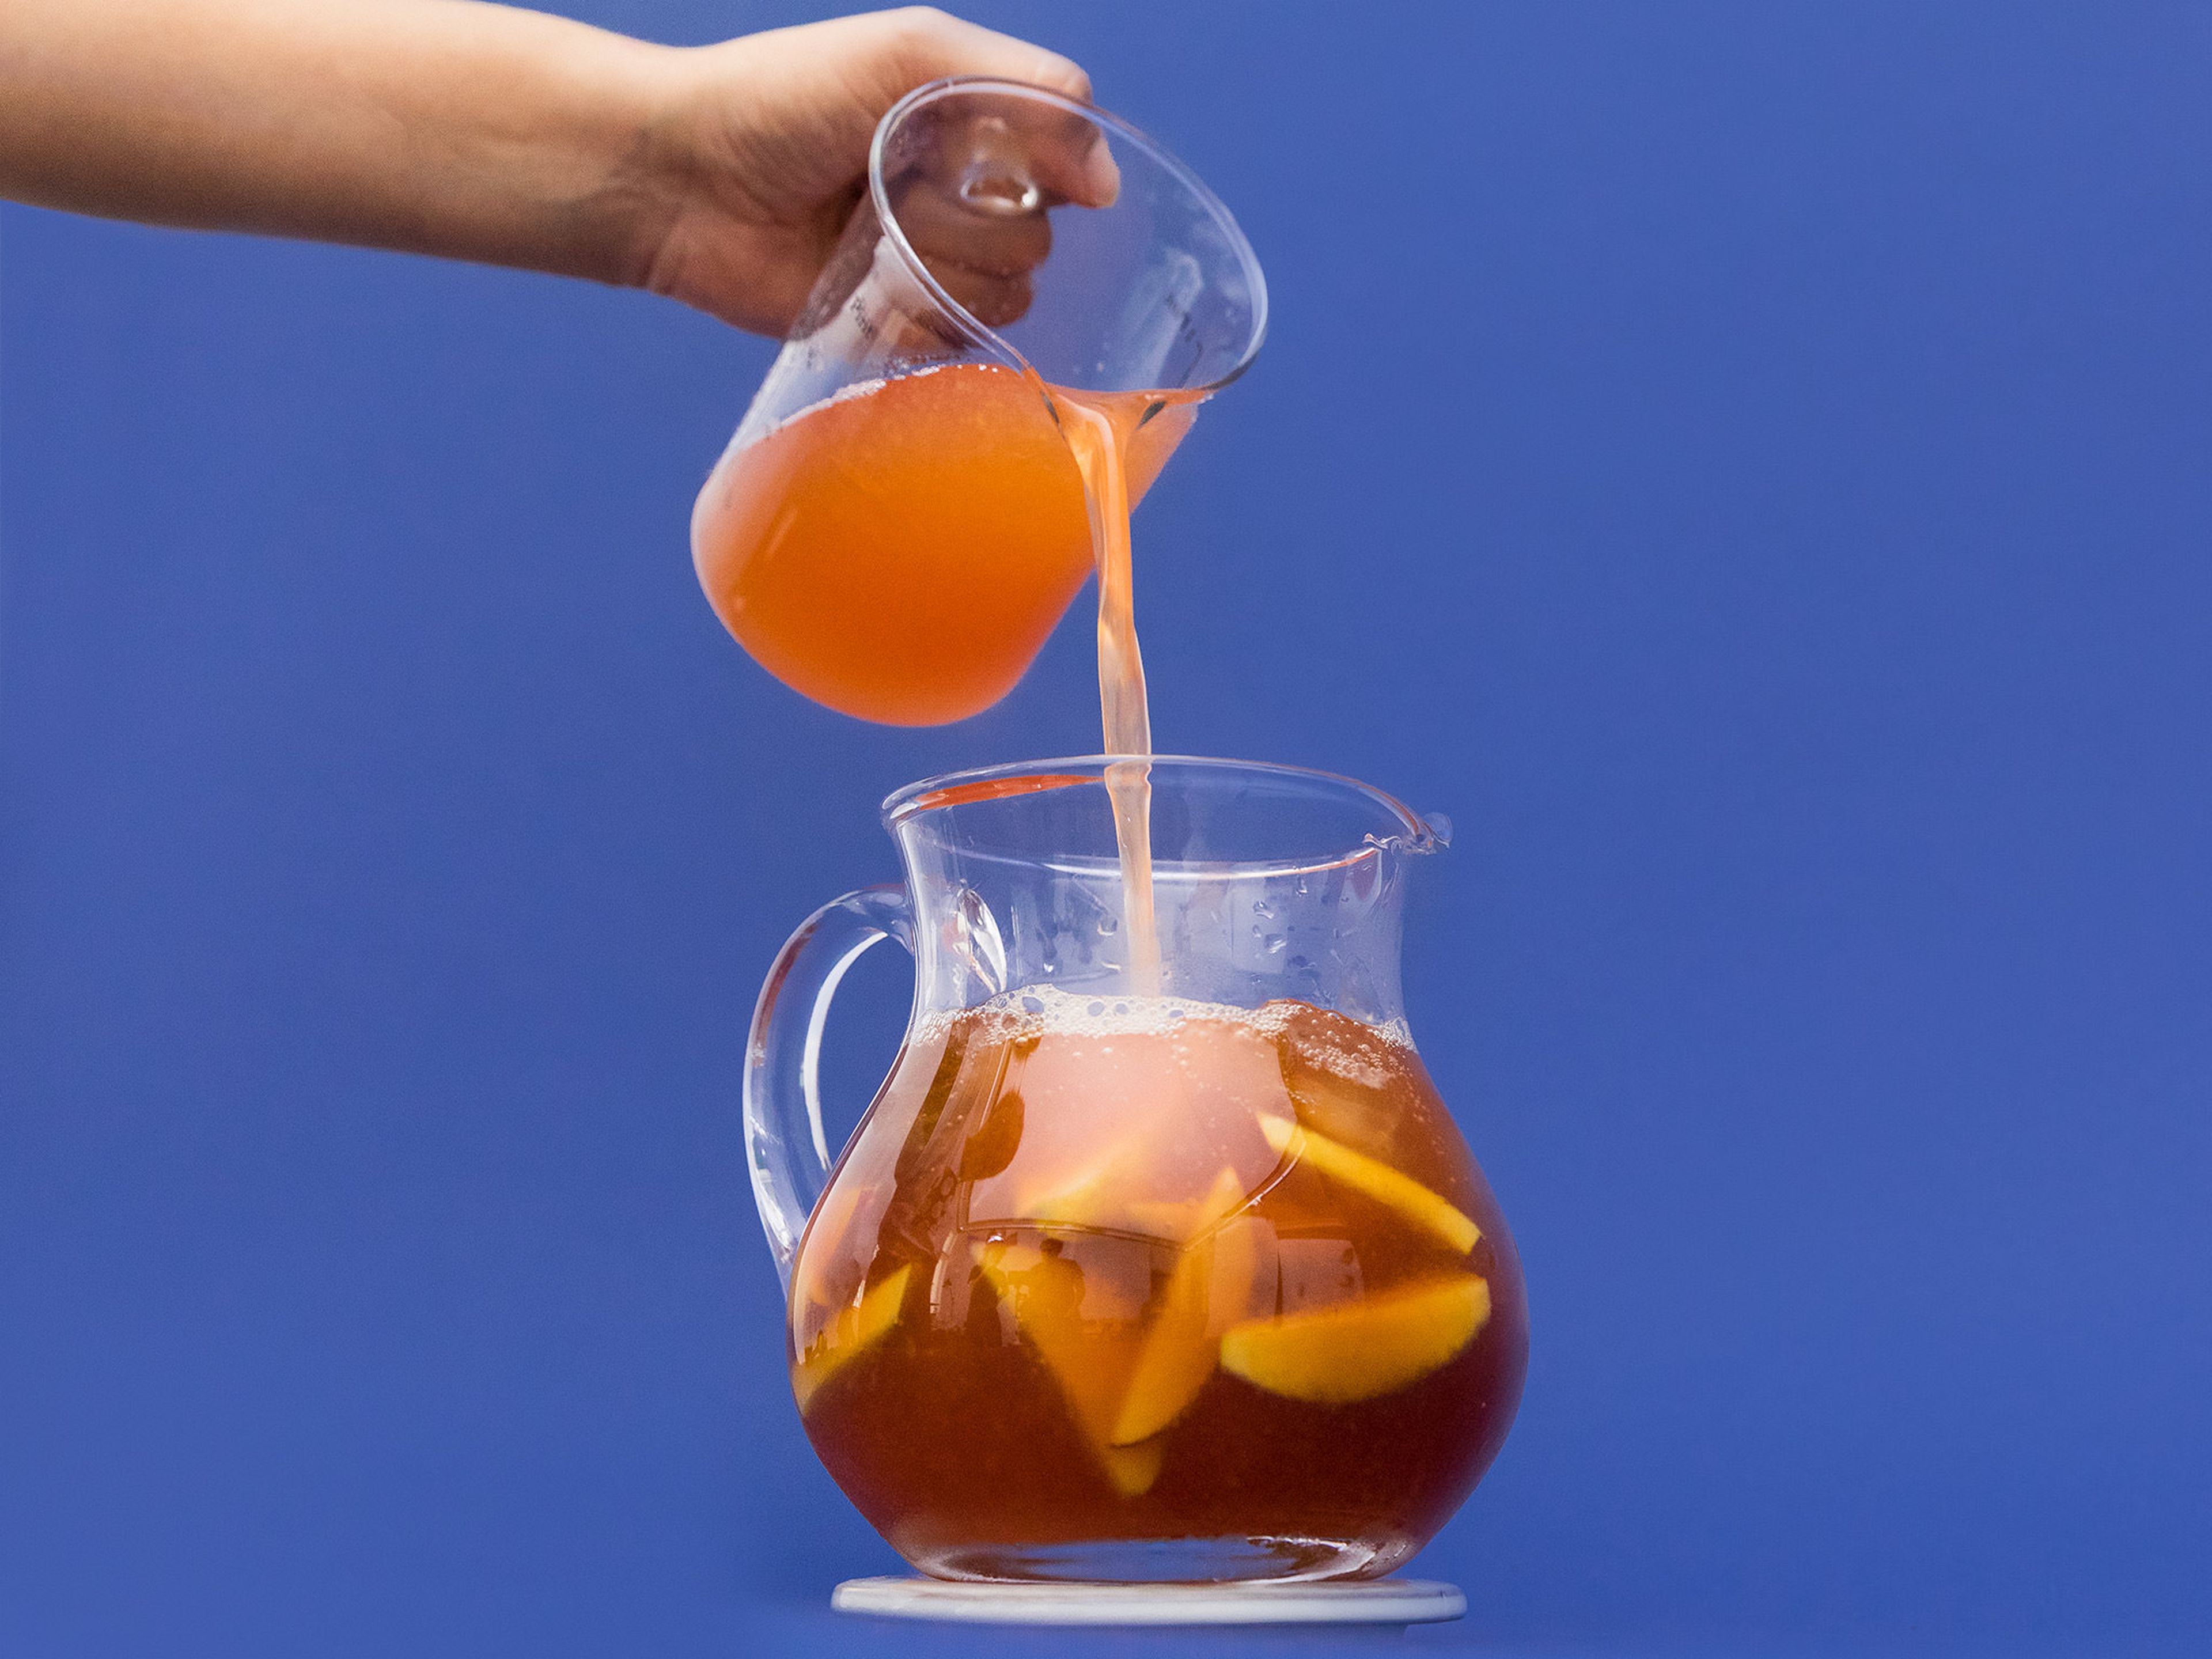 Prepare a large pitcher with ice, more mint sprigs, and remaining sliced peach. Pour in iced water, followed by the cooled tea, peach syrup, and lemon juice. Stir well. Pour into glasses and enjoy!